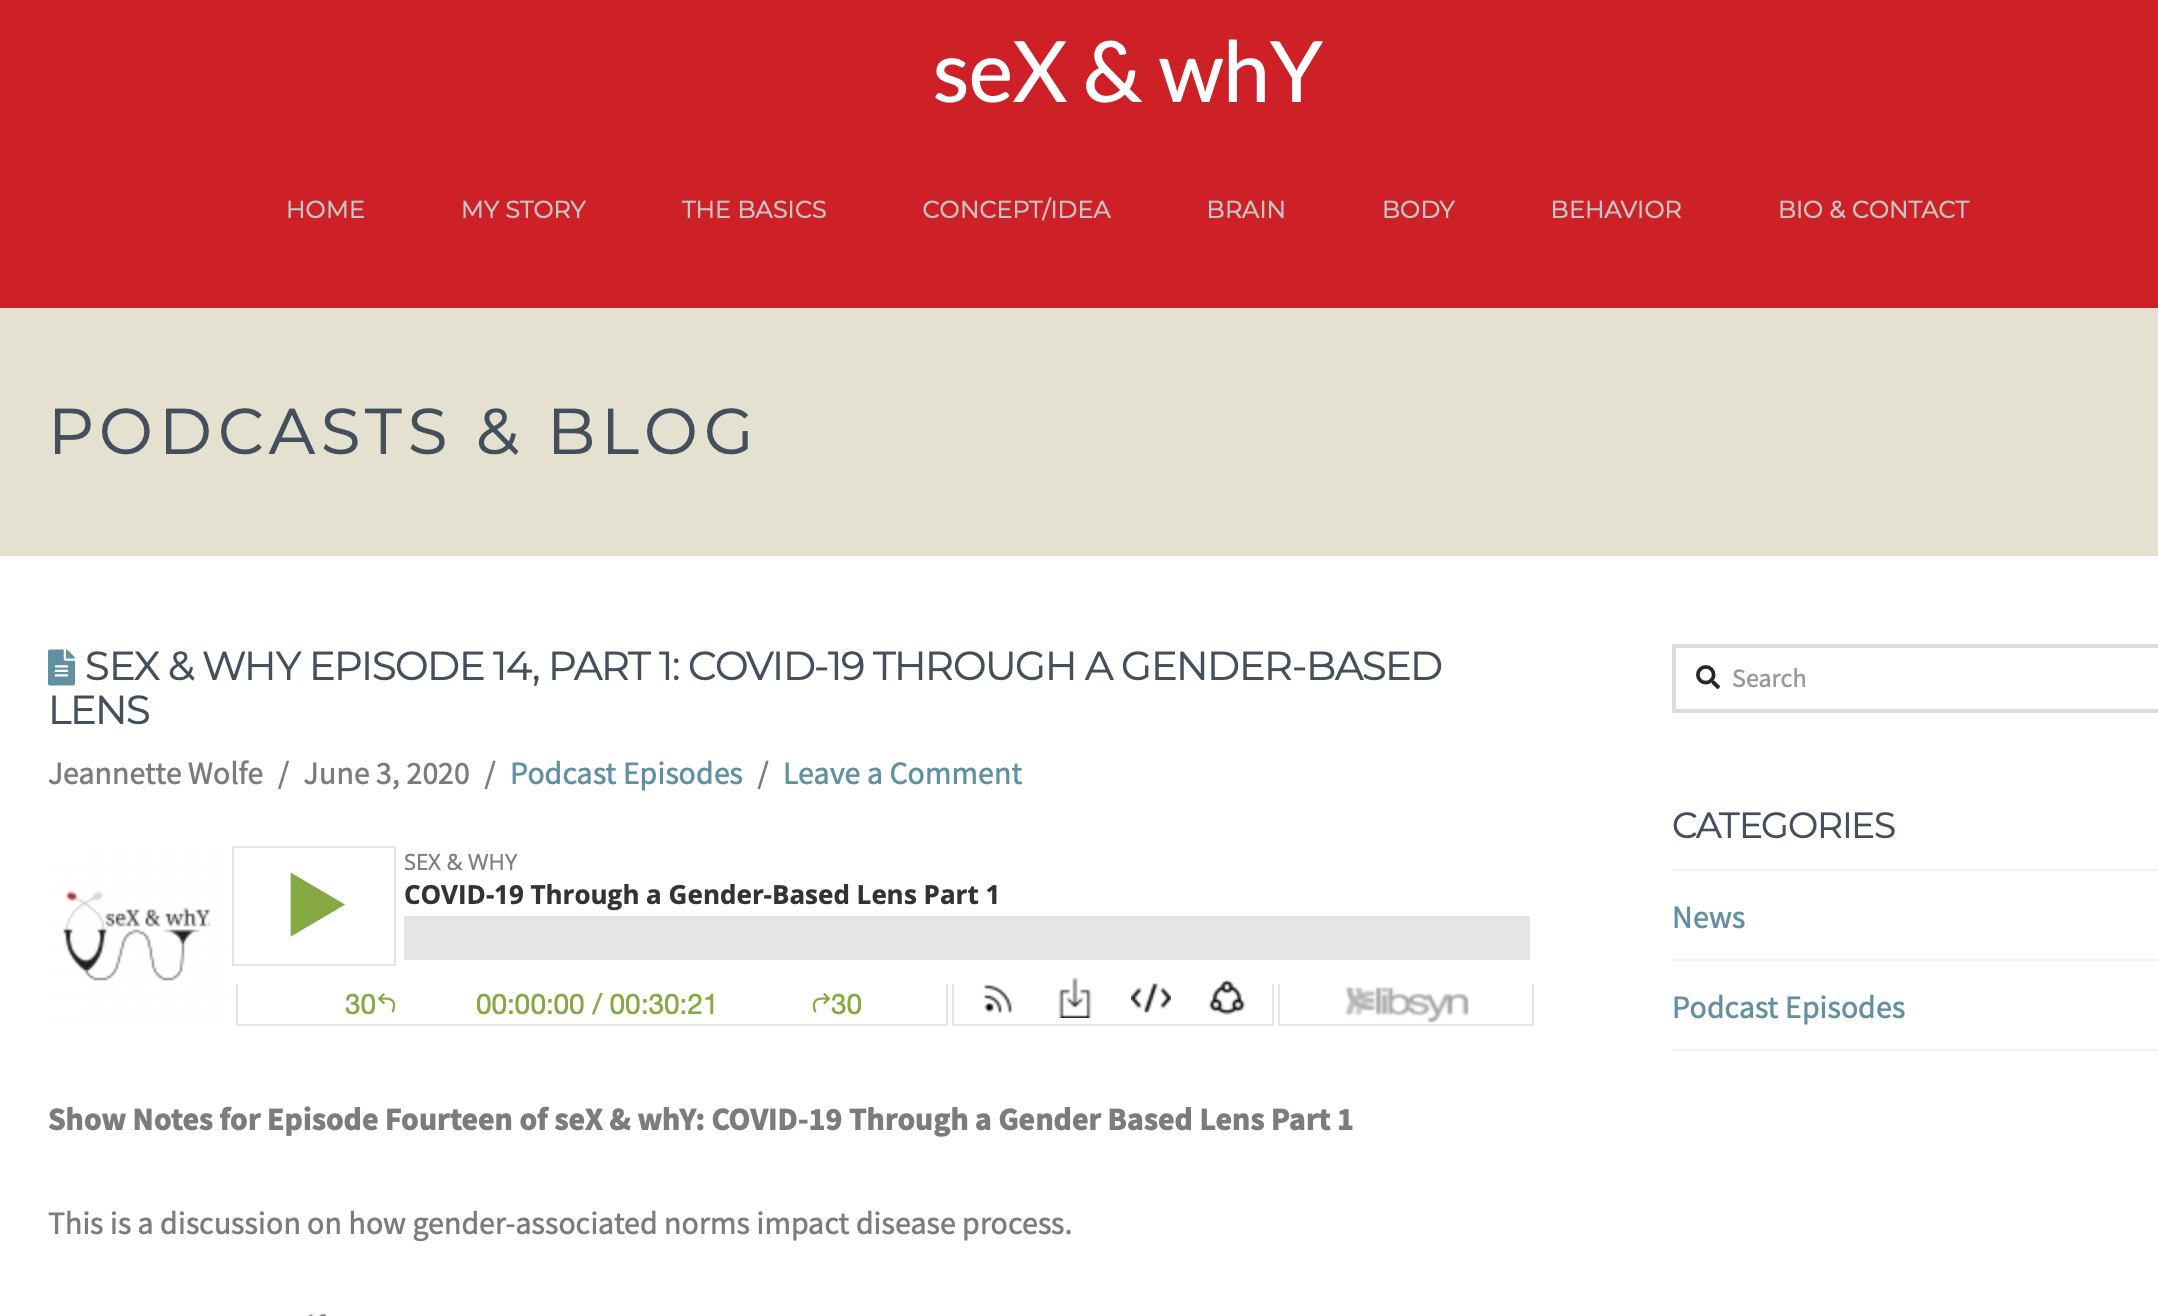 seX & whY episode 14: COVID-19 through a gender-based lens